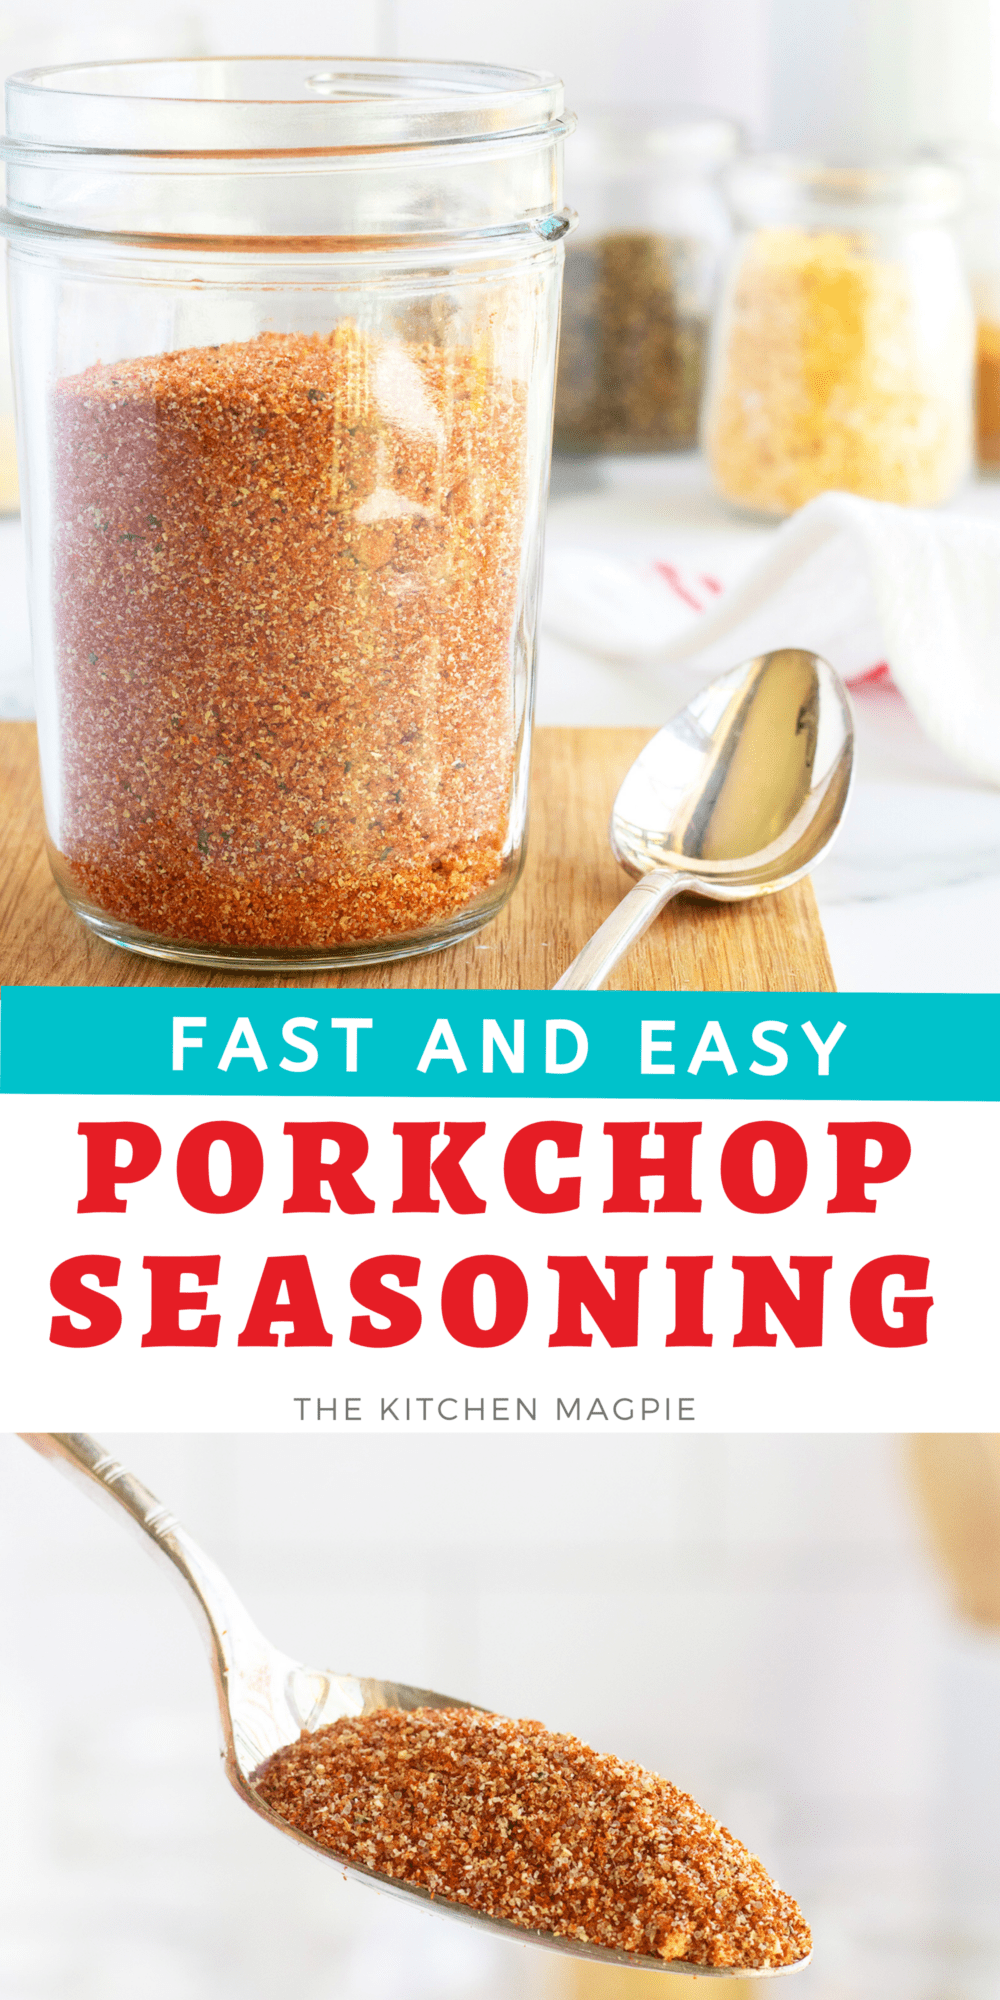 Without the proper seasoning, pork chops can be dry, bland, and tasteless. To help ensure you get only the best-tasting pork chops, make sure to use this delicious seasoning blend.